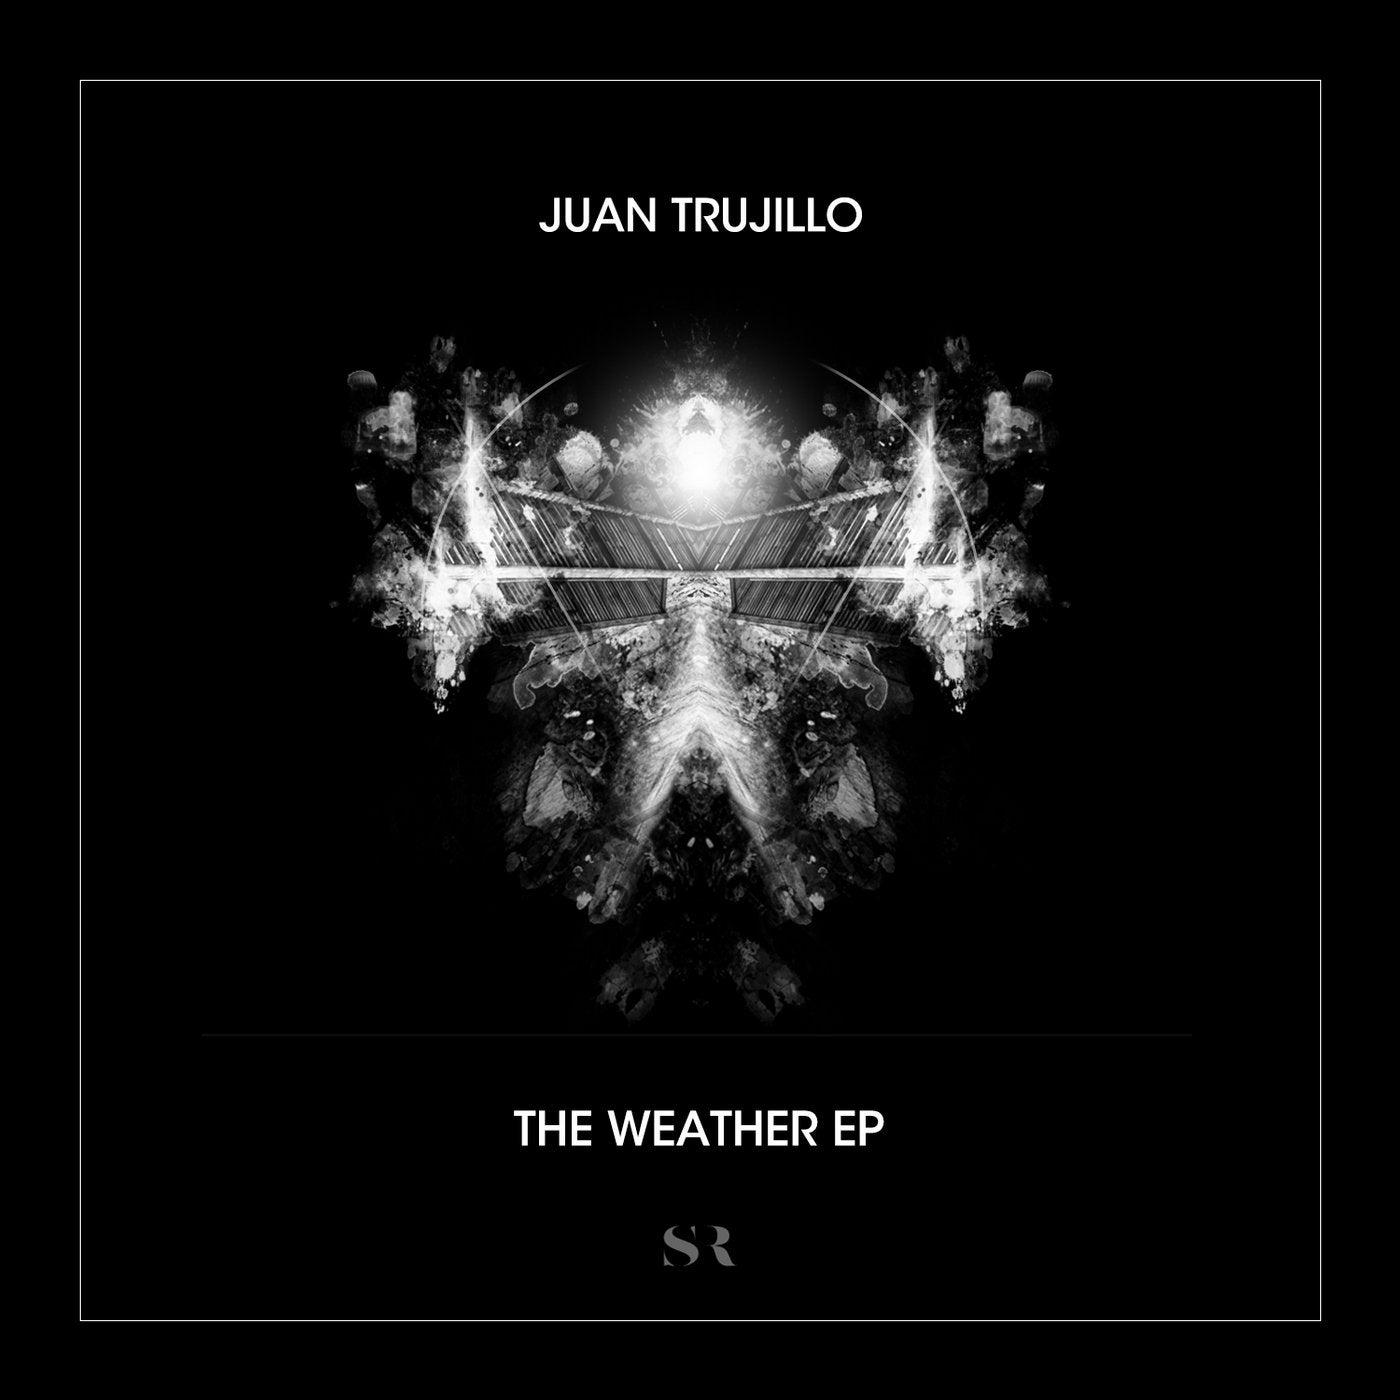 The Weather EP